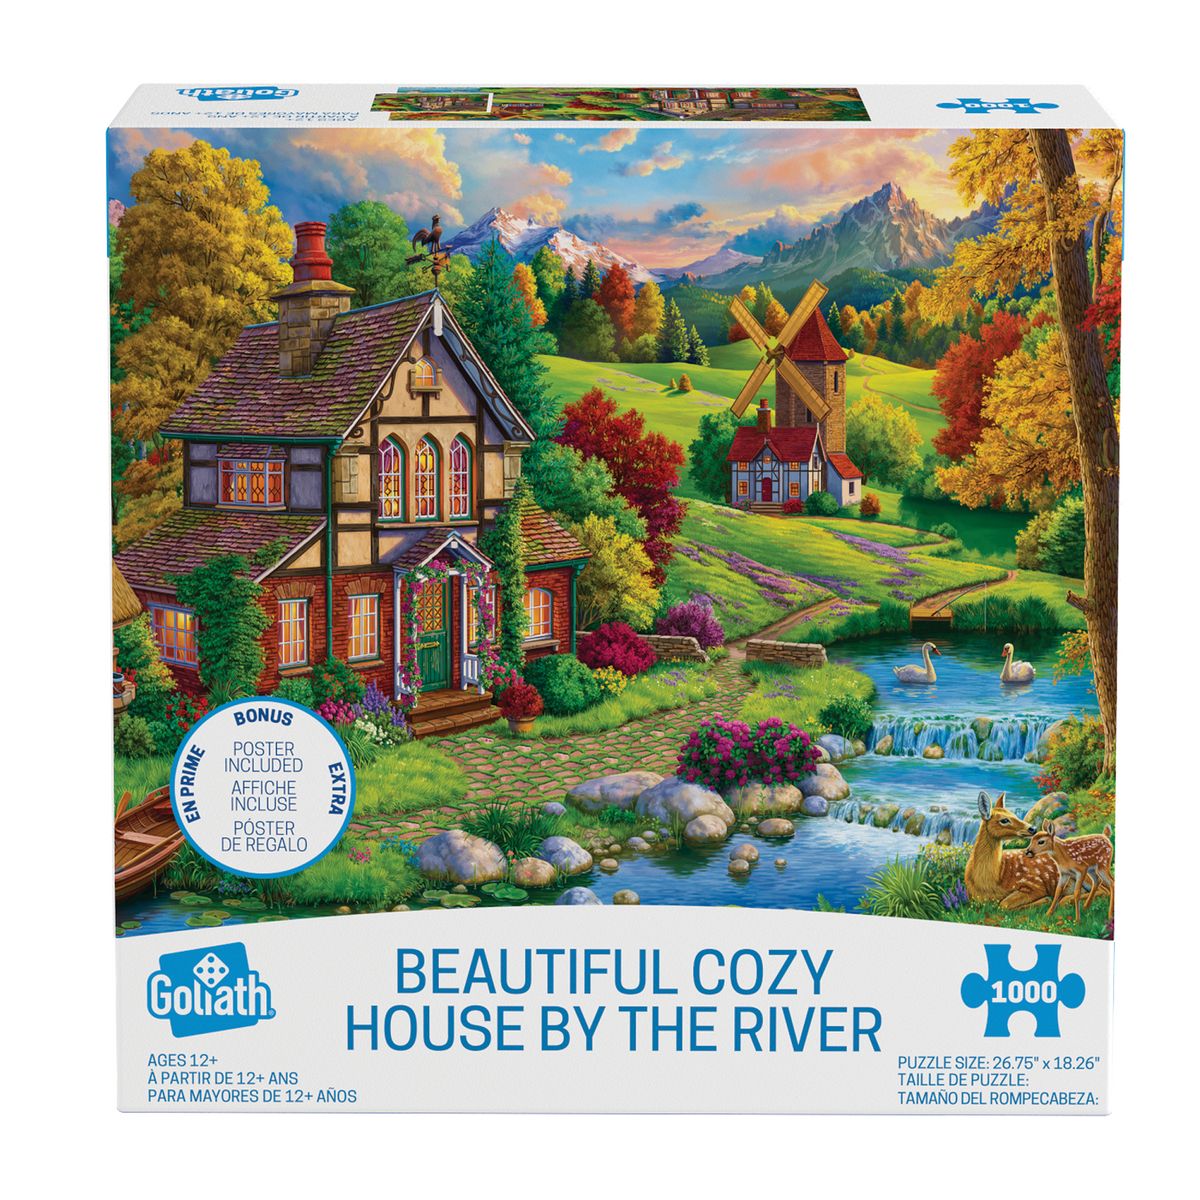 [RDY] [送料無料] Goliath Image World Beautiful Cozy House by the River 1000pc Puzzle - Poster Included [楽天海外通販] | Goliath Image World Beautiful Cozy House by the River 1000pc Puzzle - Poster Included